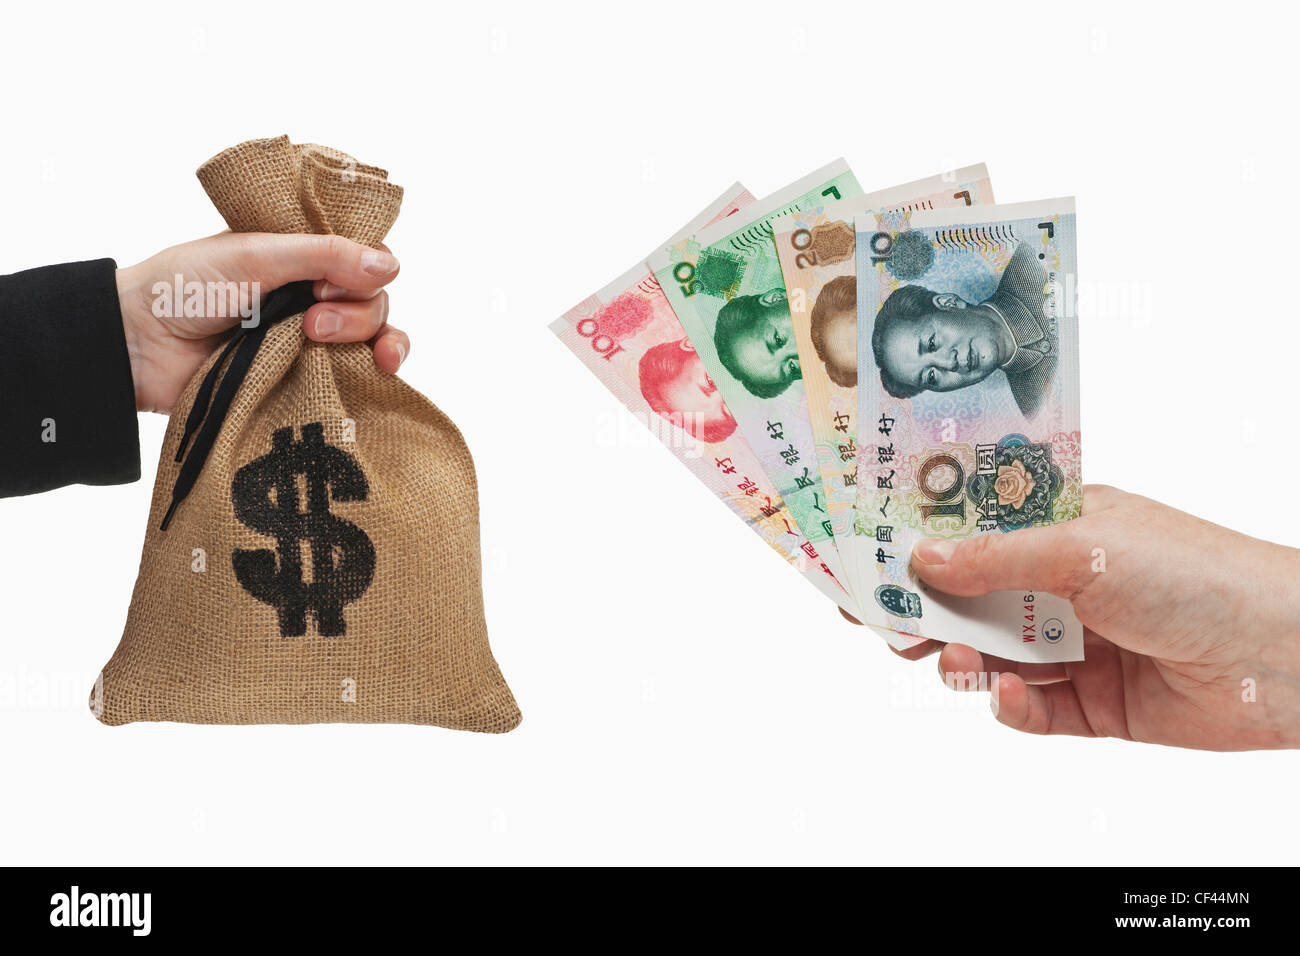 Diverse Chinese Yuan bills are held in the hand. At the other side a money bag with a U.S. Dollar currency sign held in the hand Stock Photo